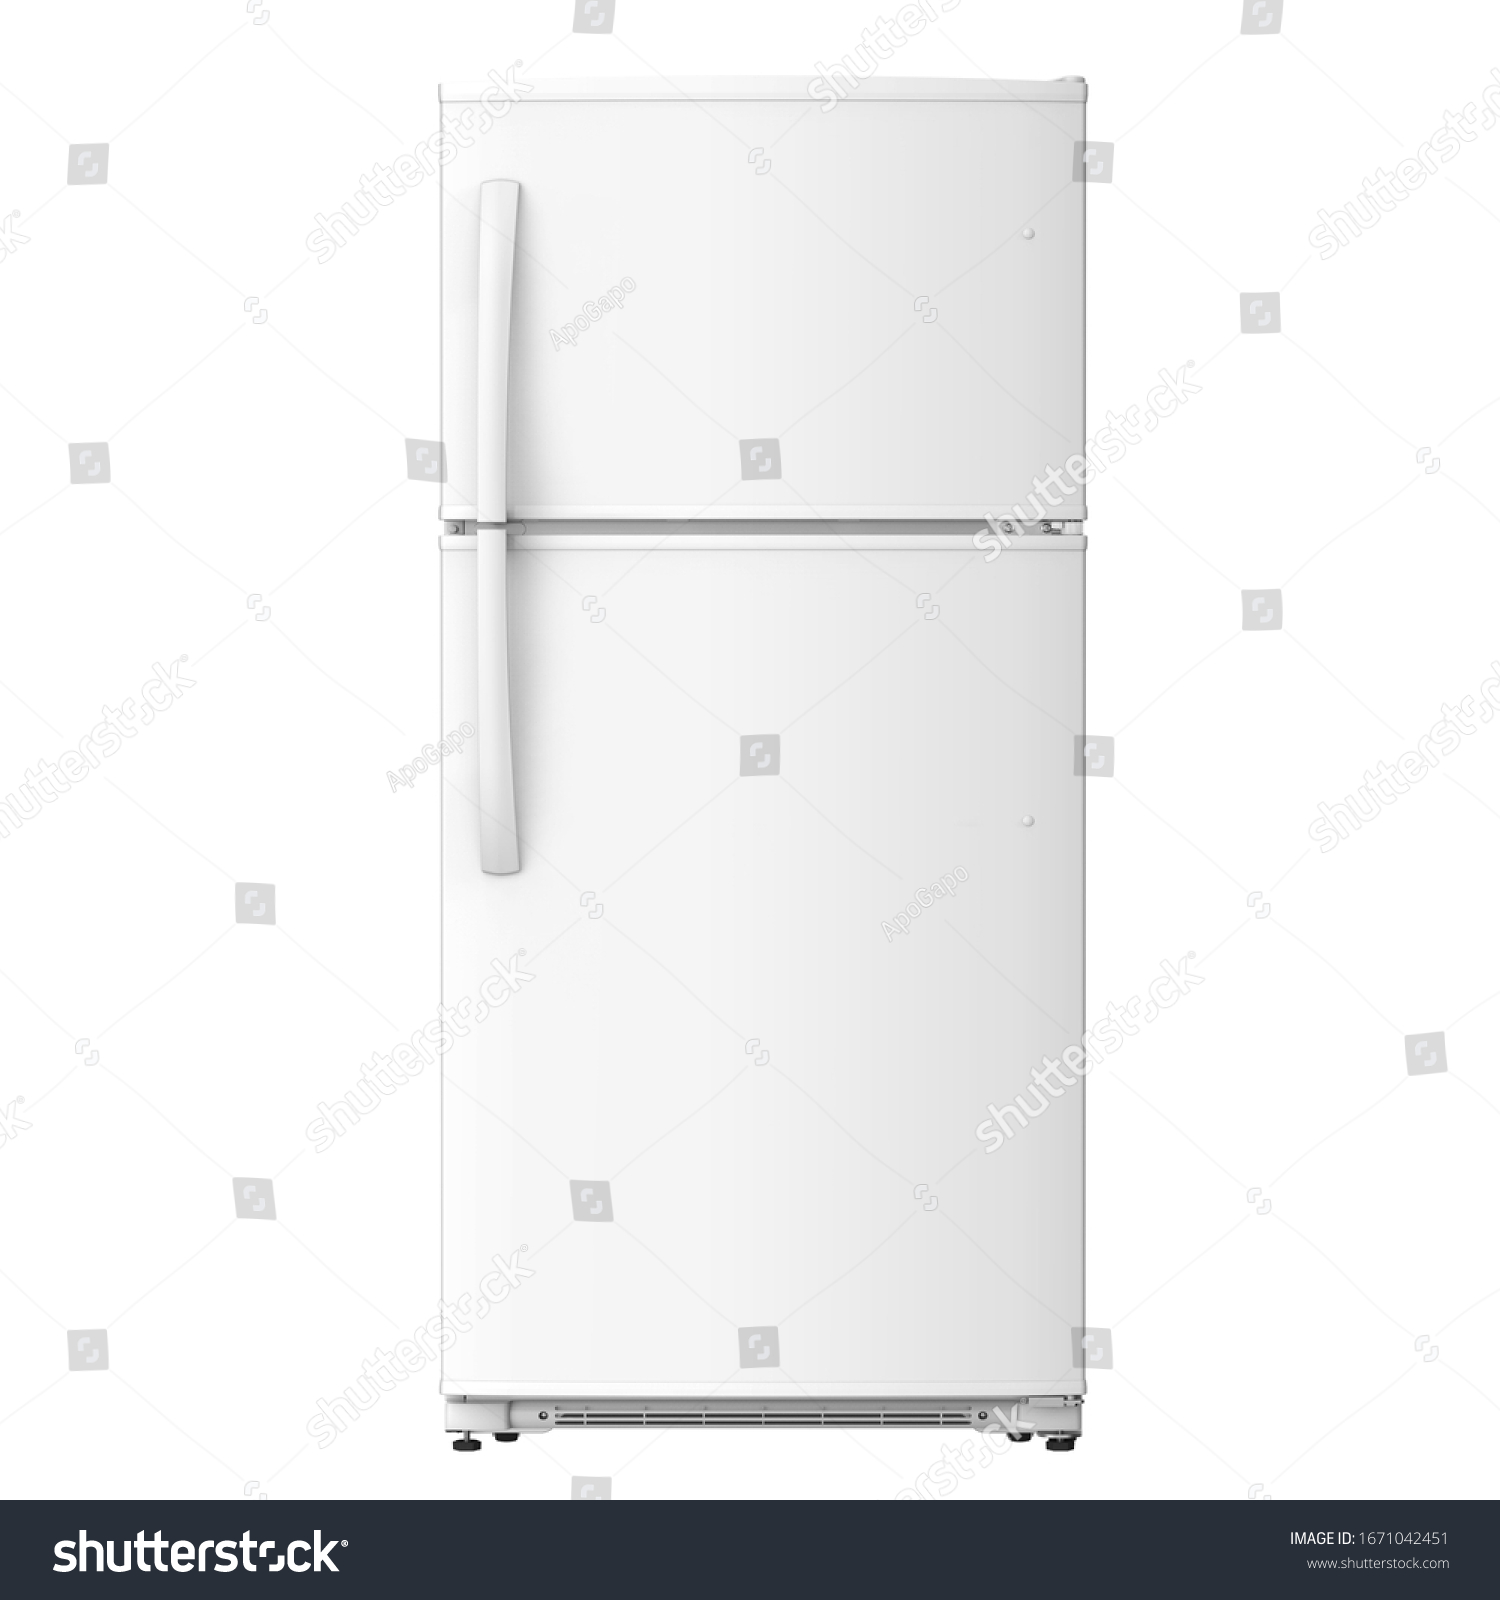 White Refrigerator Isolated on White Background. Modern Top Mount Fridge Freezer. Electric Kitchen and Domestic Major Appliances. Front View of Two Door Top-Freezer Fridge Freezer #1671042451